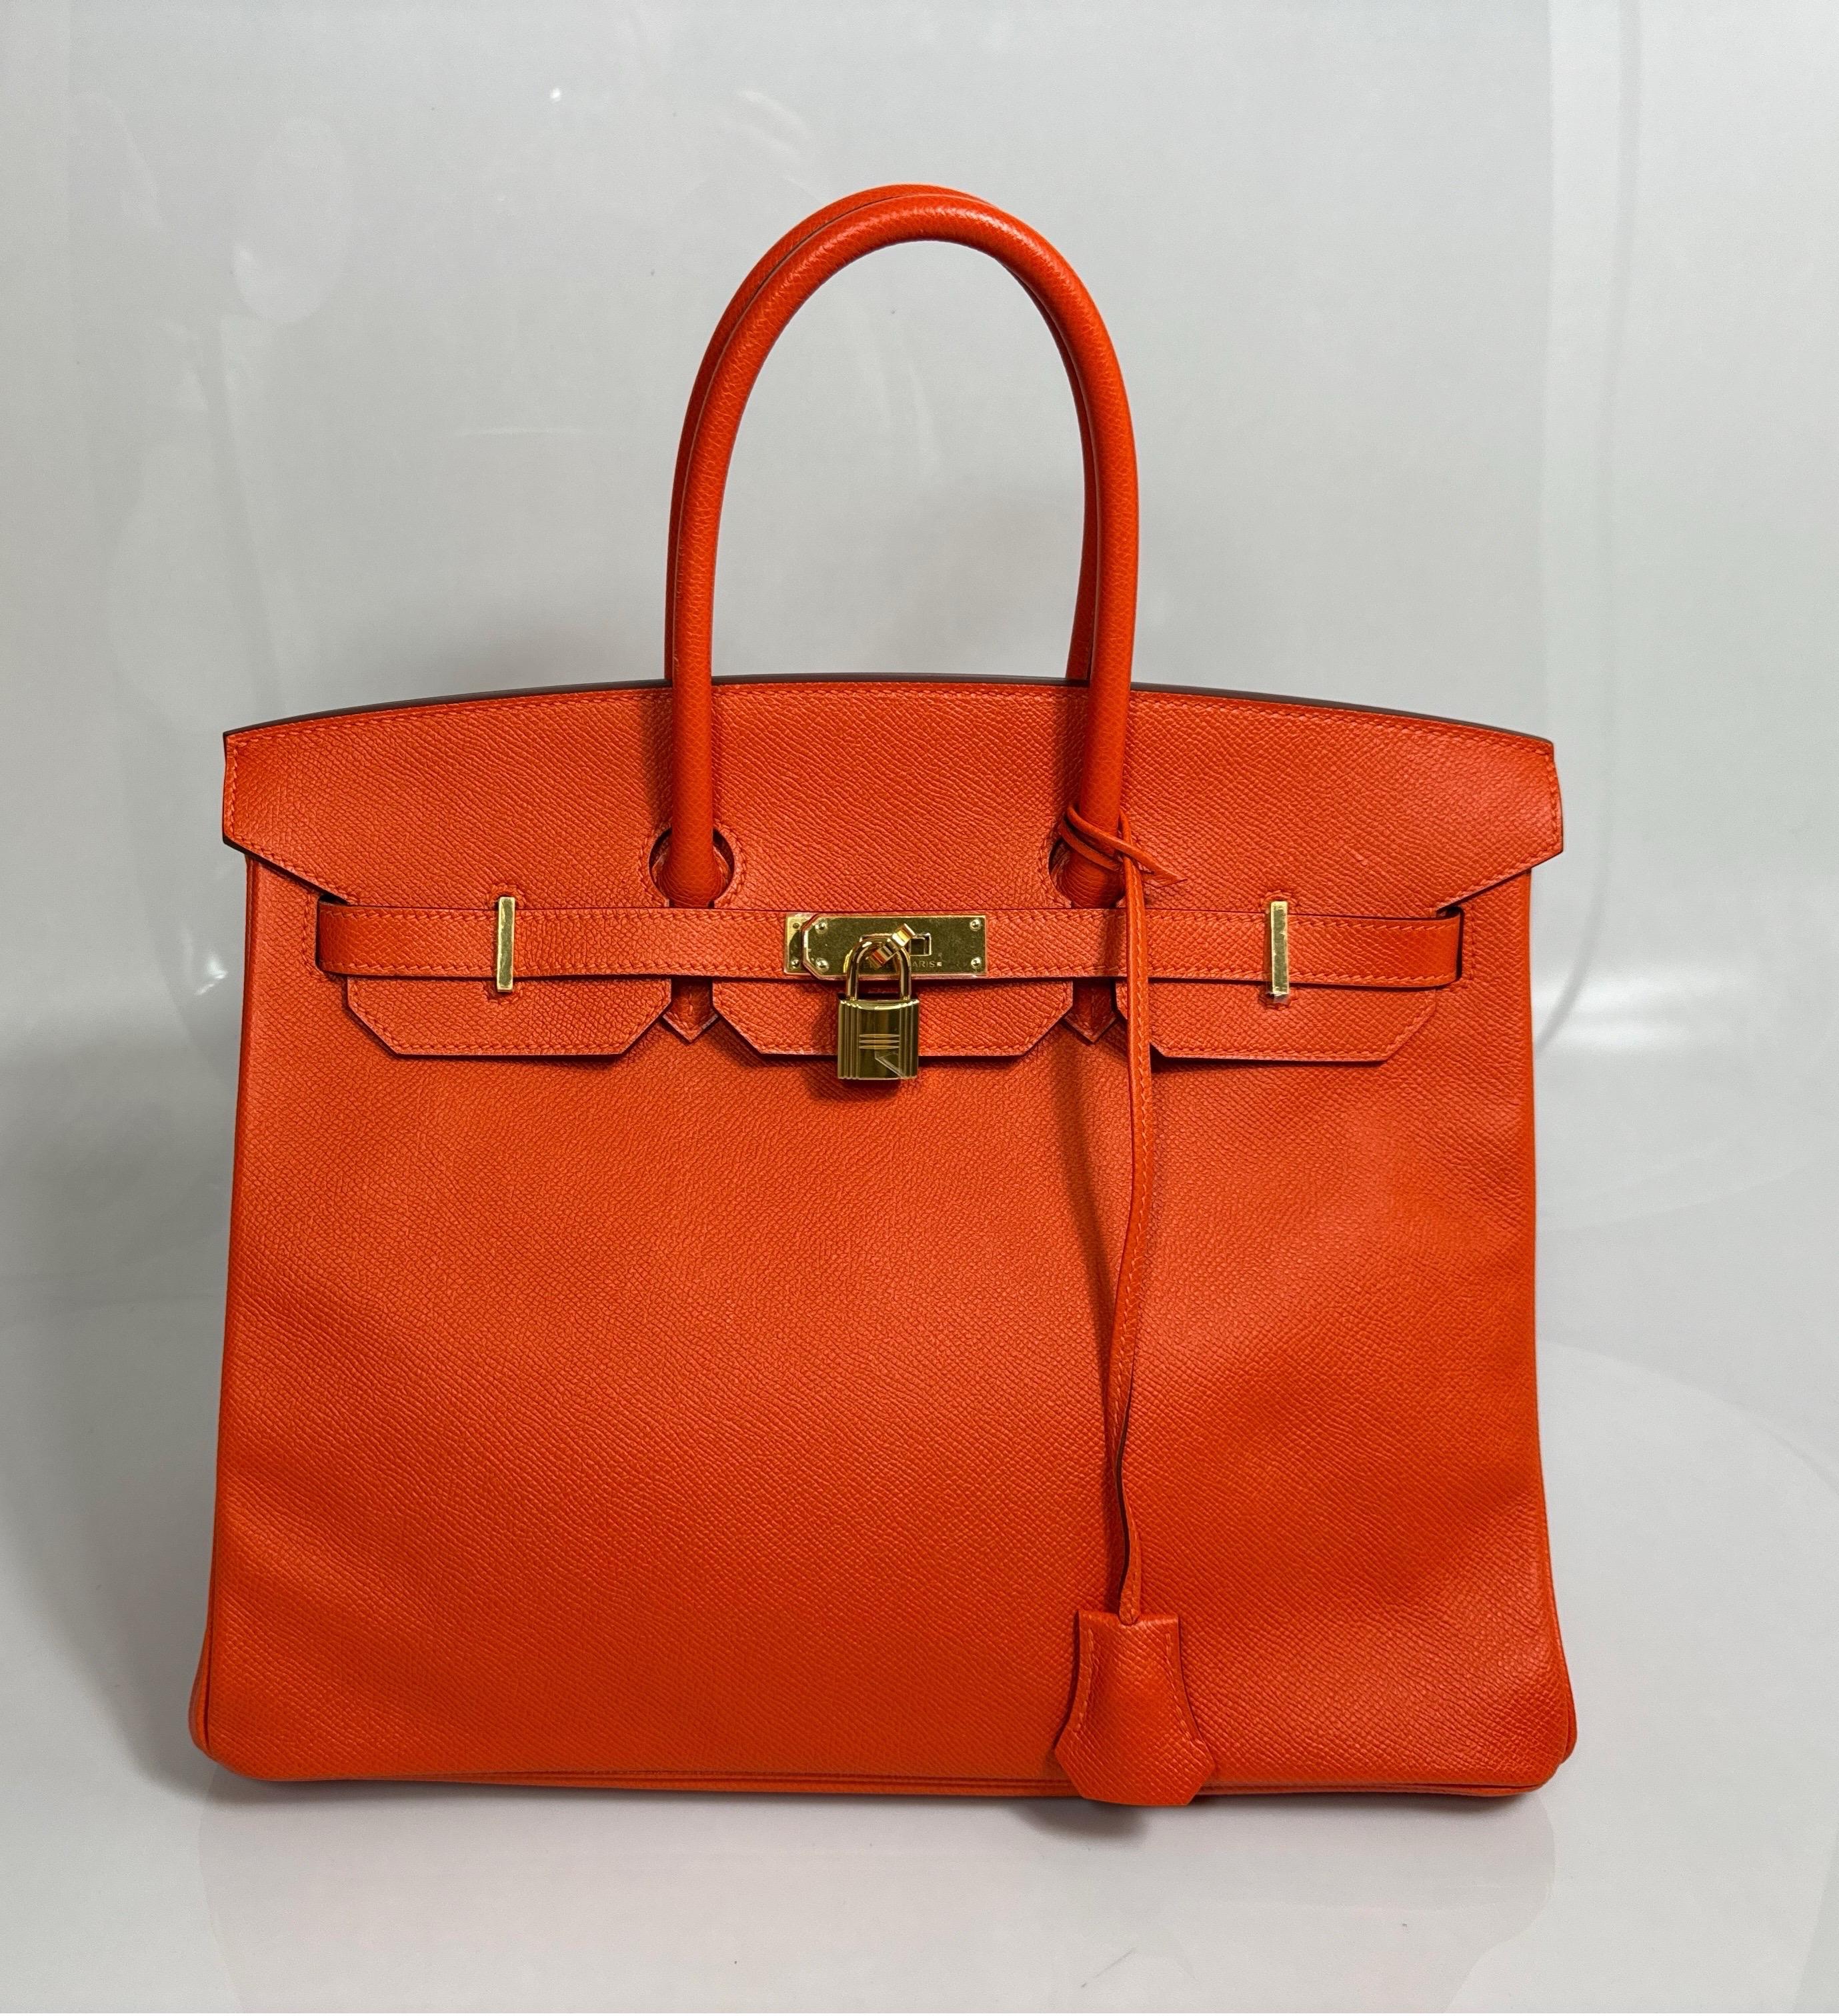 Hermes Orange Togo 35cm Birkin - 2016 - GHW - NEW This Birkin is new and never carried although it was purchased in 2016. The 35cm iconic Birkin is in Hermes signature Orange Togo leather with gold hardware and has tonal stitching, a front toggle